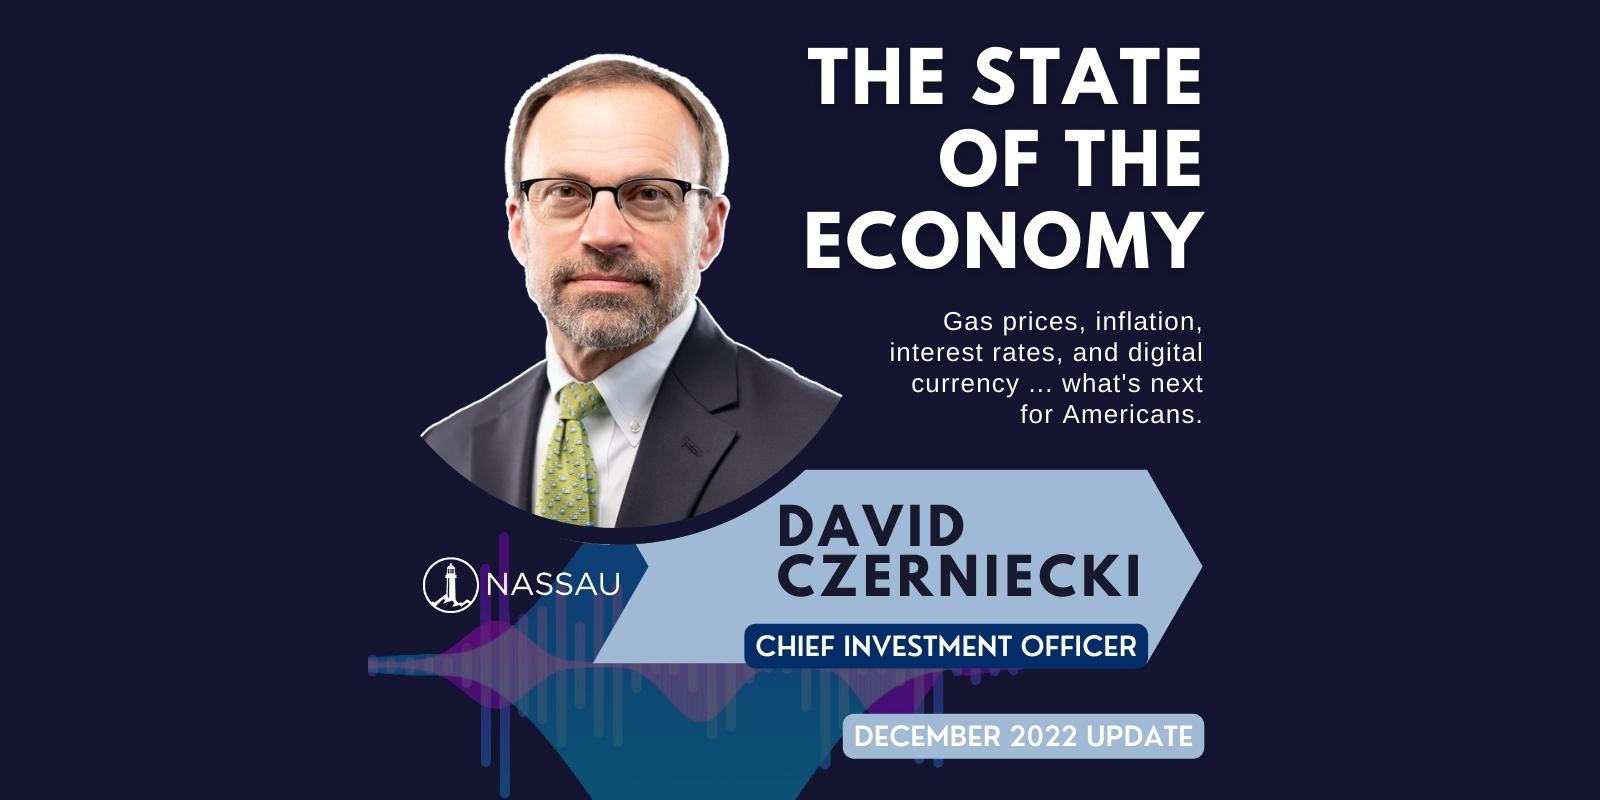 December 2022 Update – The State of the Economy with David Czerniecki